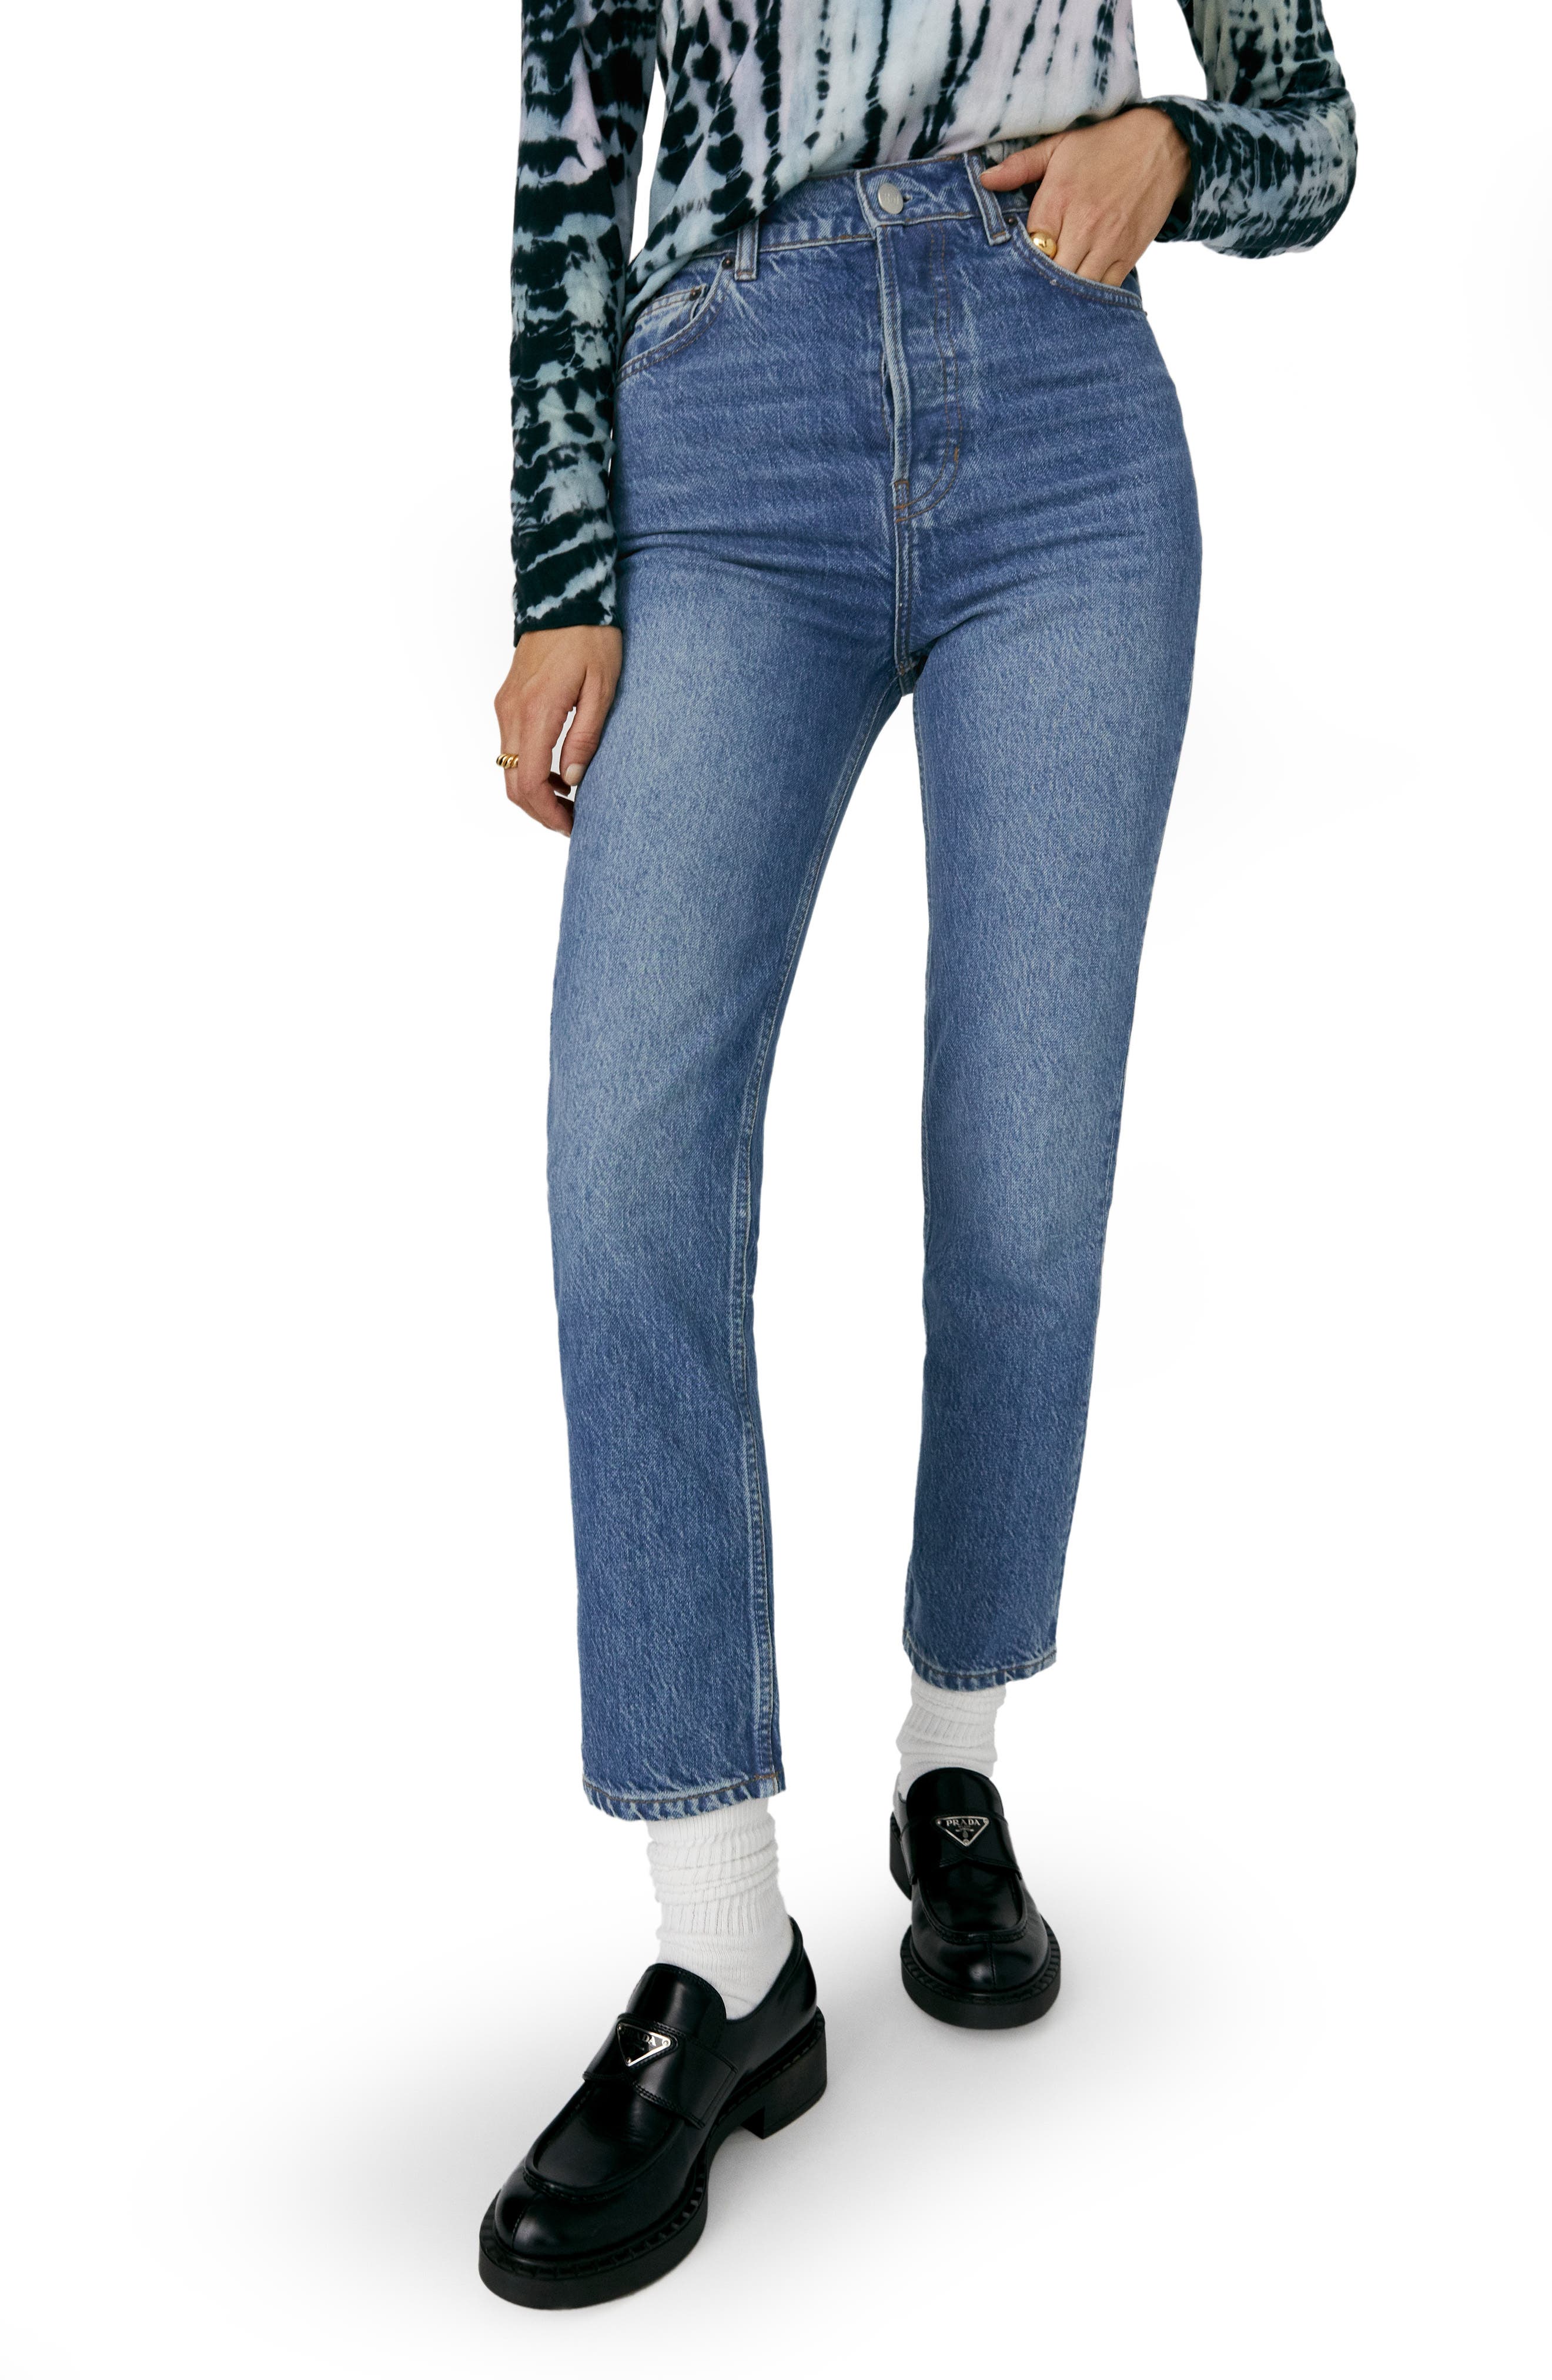 Reformation Cynthia High Waist Relaxed Jeans in Colorado at Nordstrom, Size 25